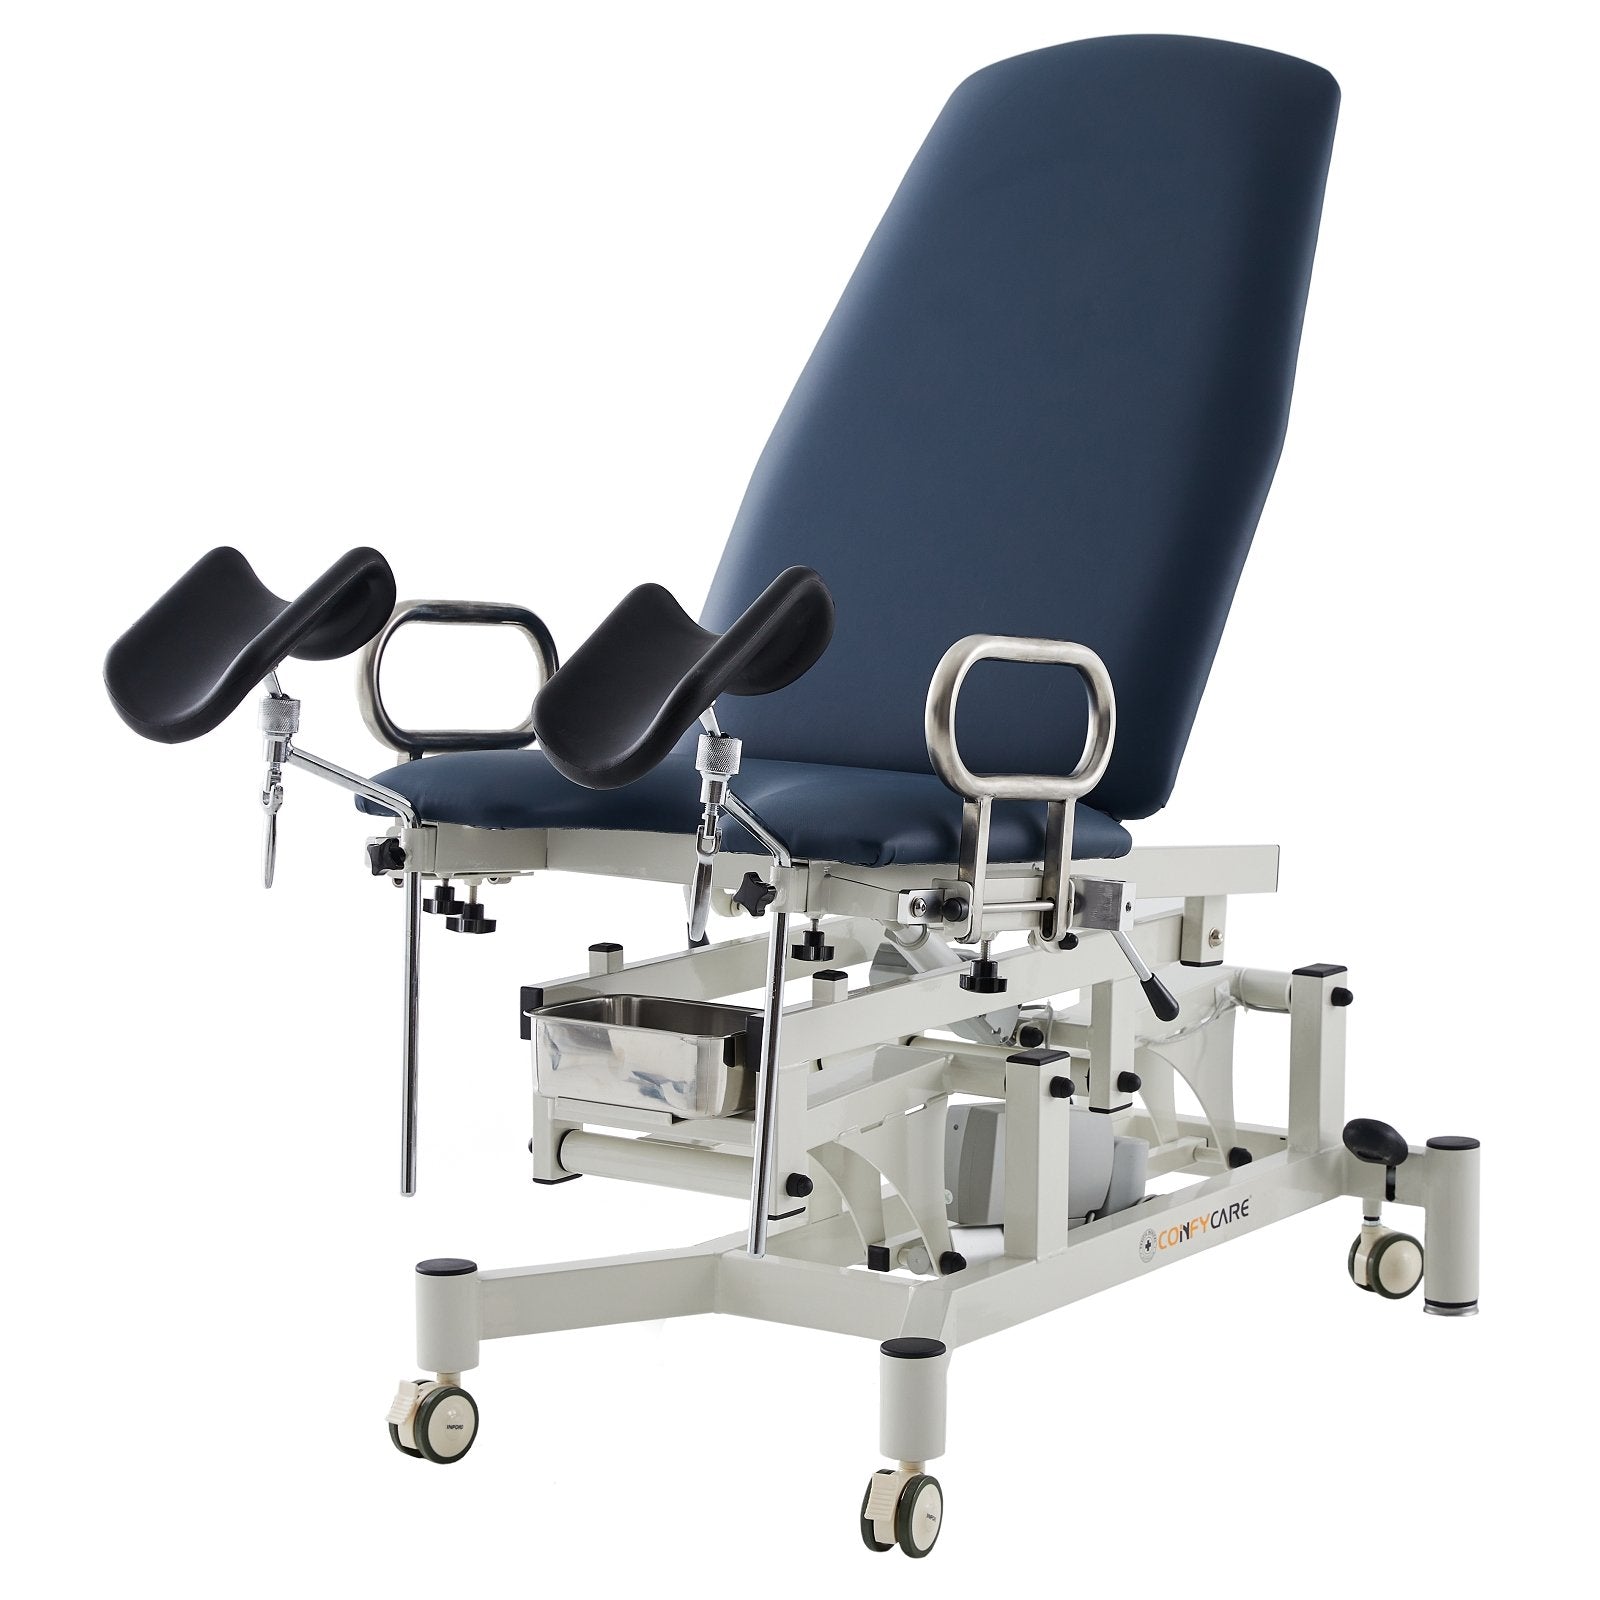 Gynae Exam Chair with Gas Lift Back - Navy Blue - Medsales